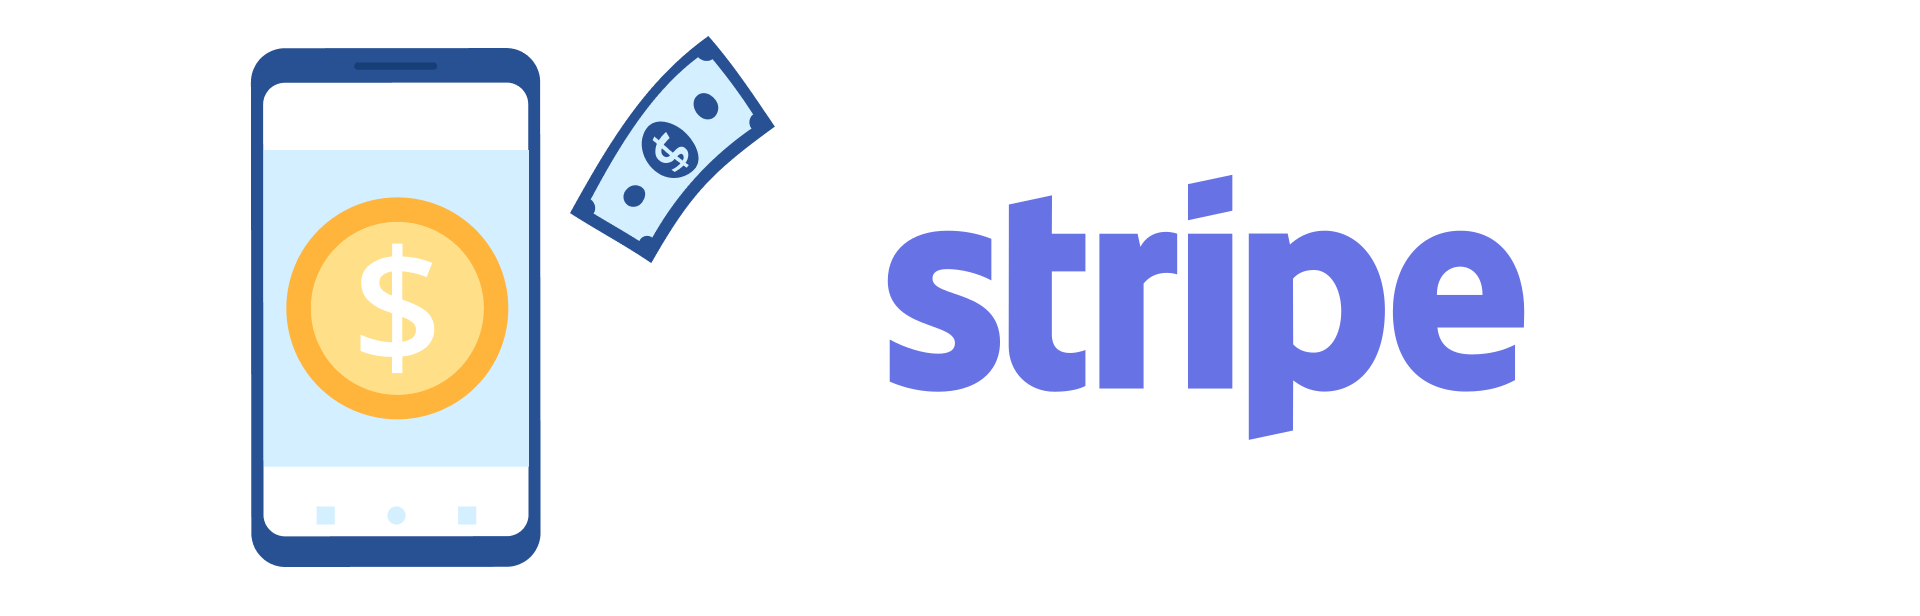 Use Stripe to boost your e-commerce business with the best PayPal alternative.